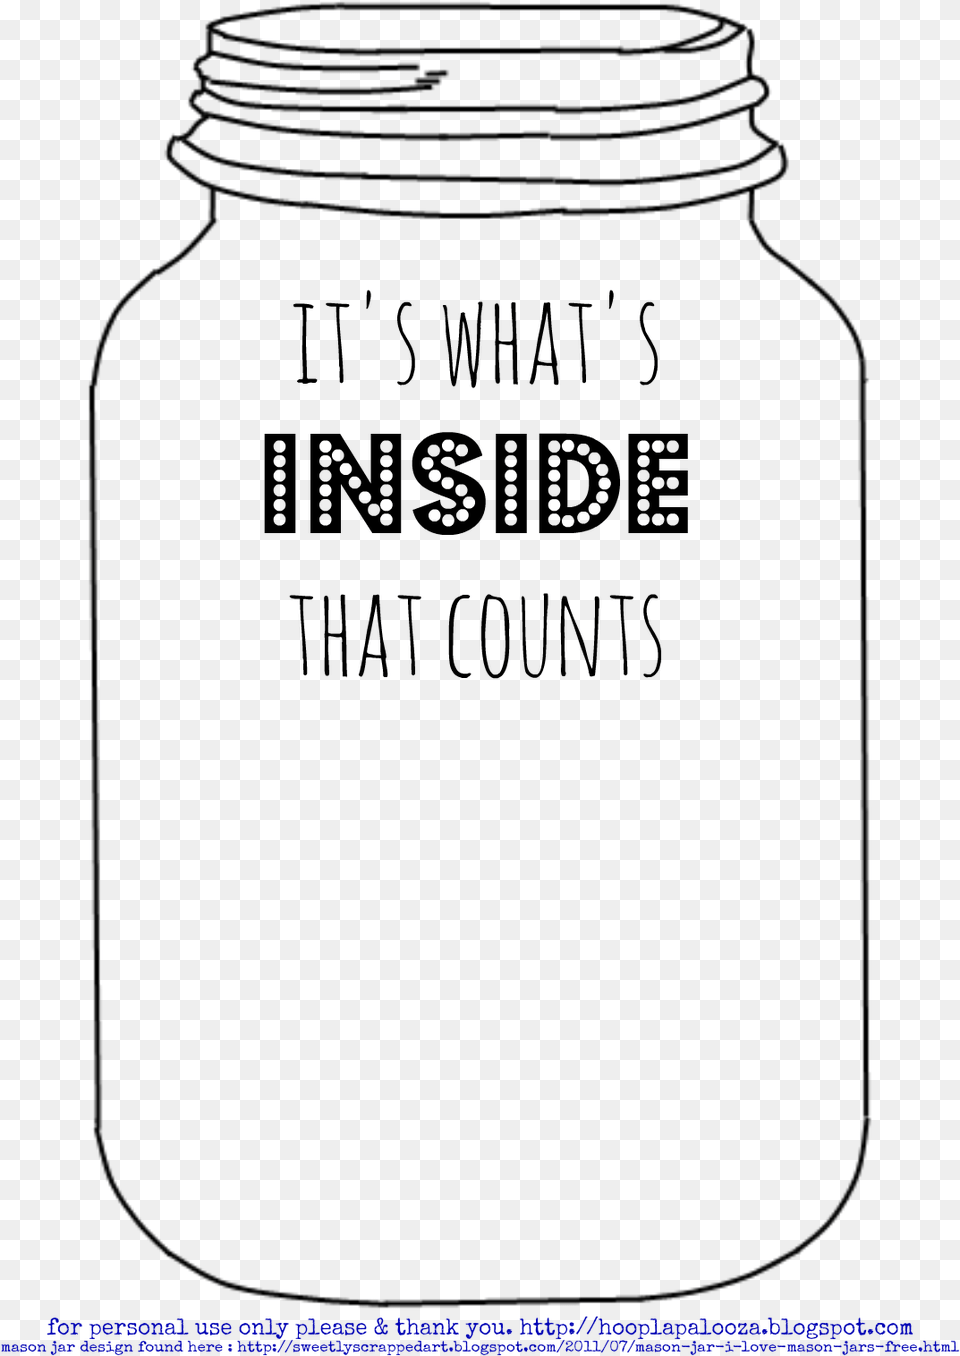 Outline Template Datariouruguay Its The Inside That Counts Free Png Download